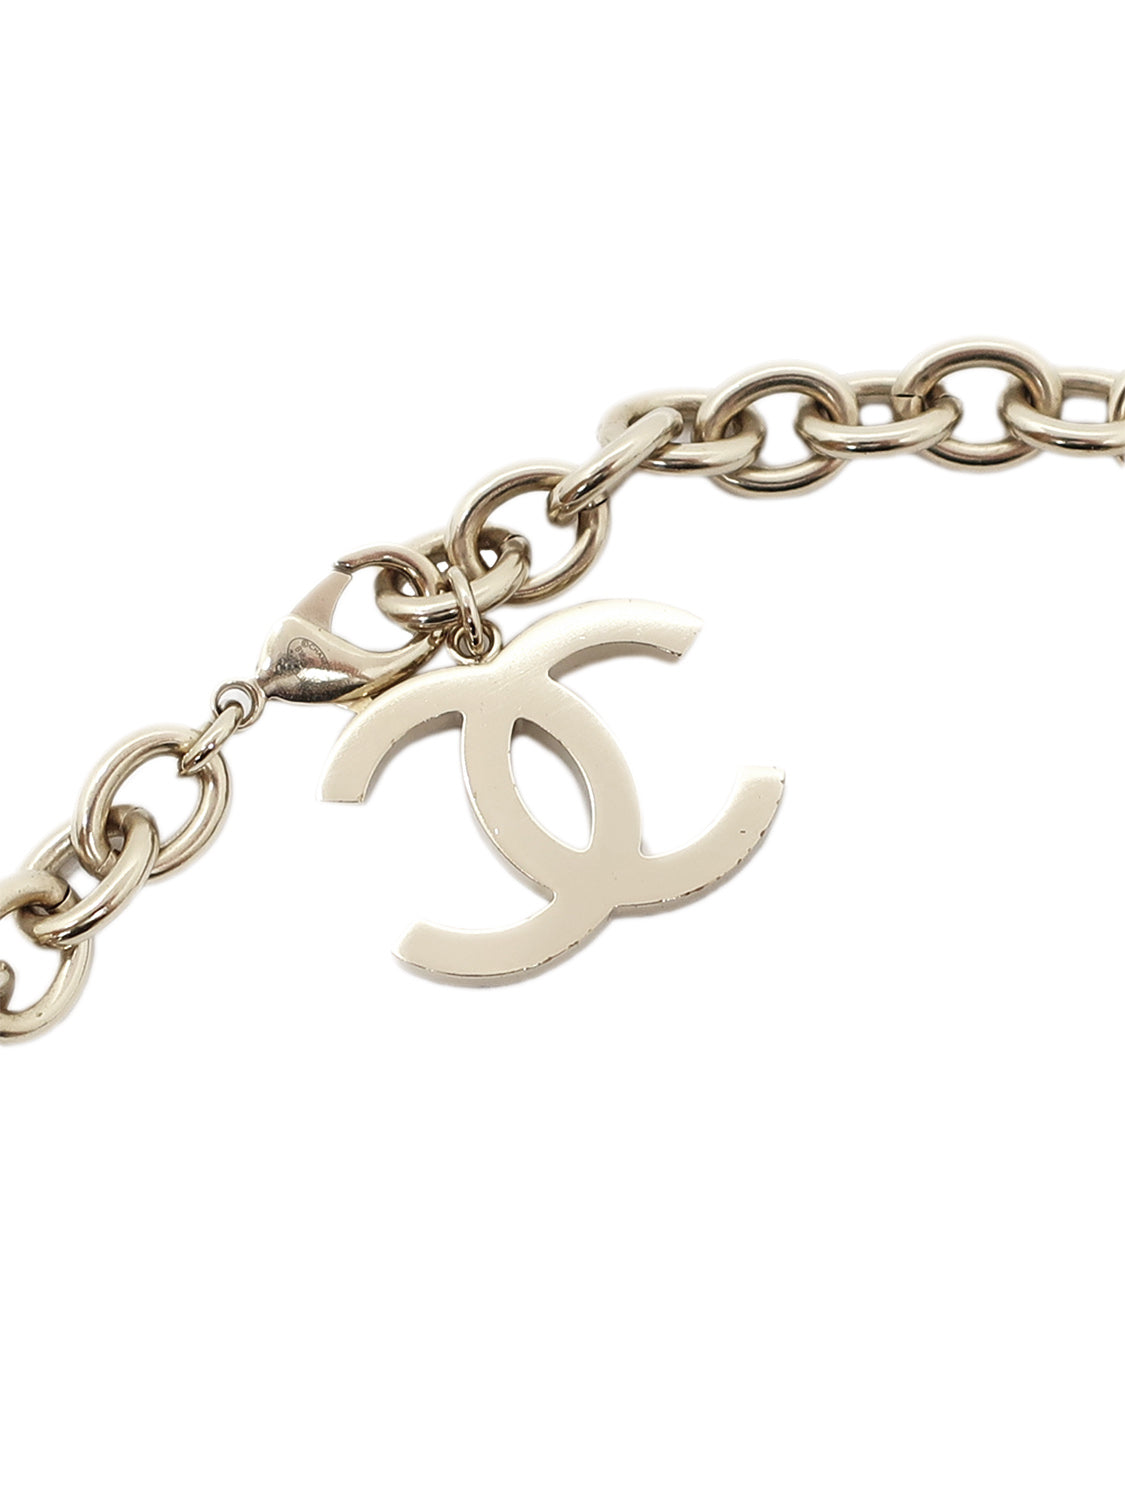 Chanel 2018 Silver Chain Letter Charm Necklace · INTO